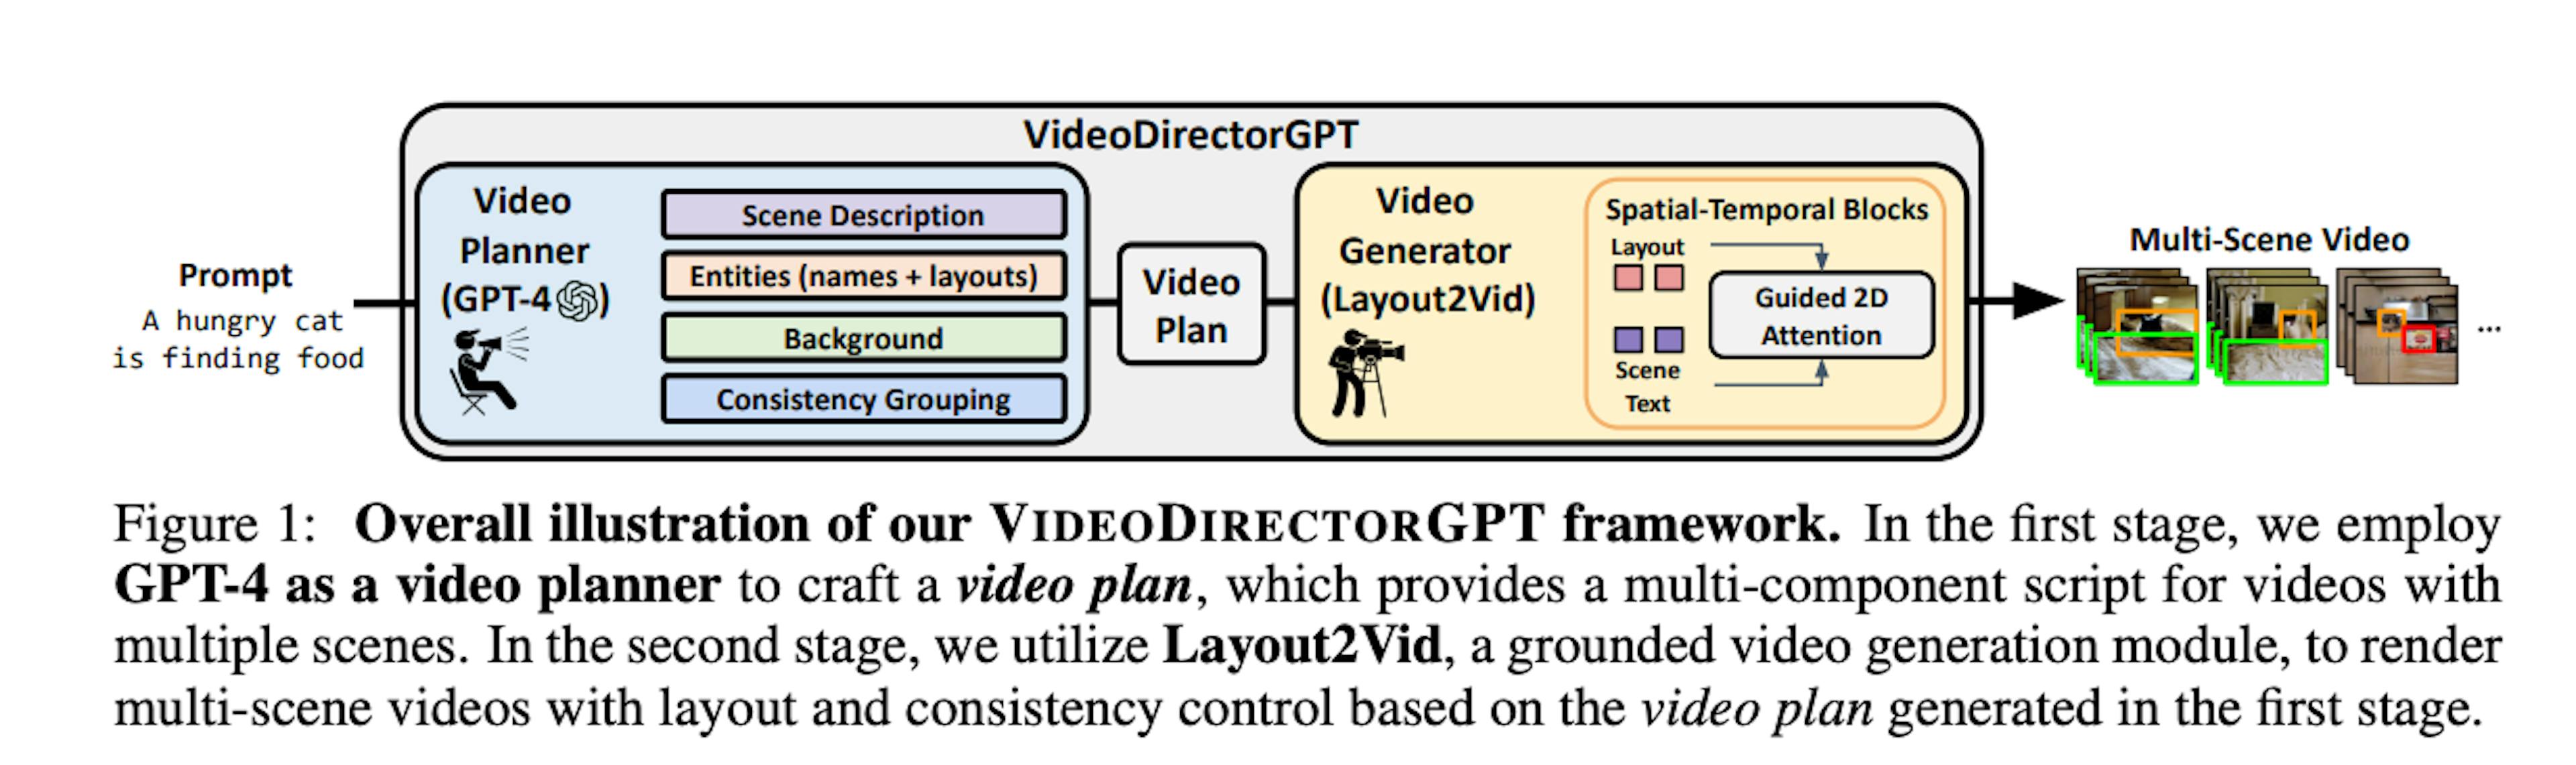 How VIDEODIRECTORGPT works - from the paper.